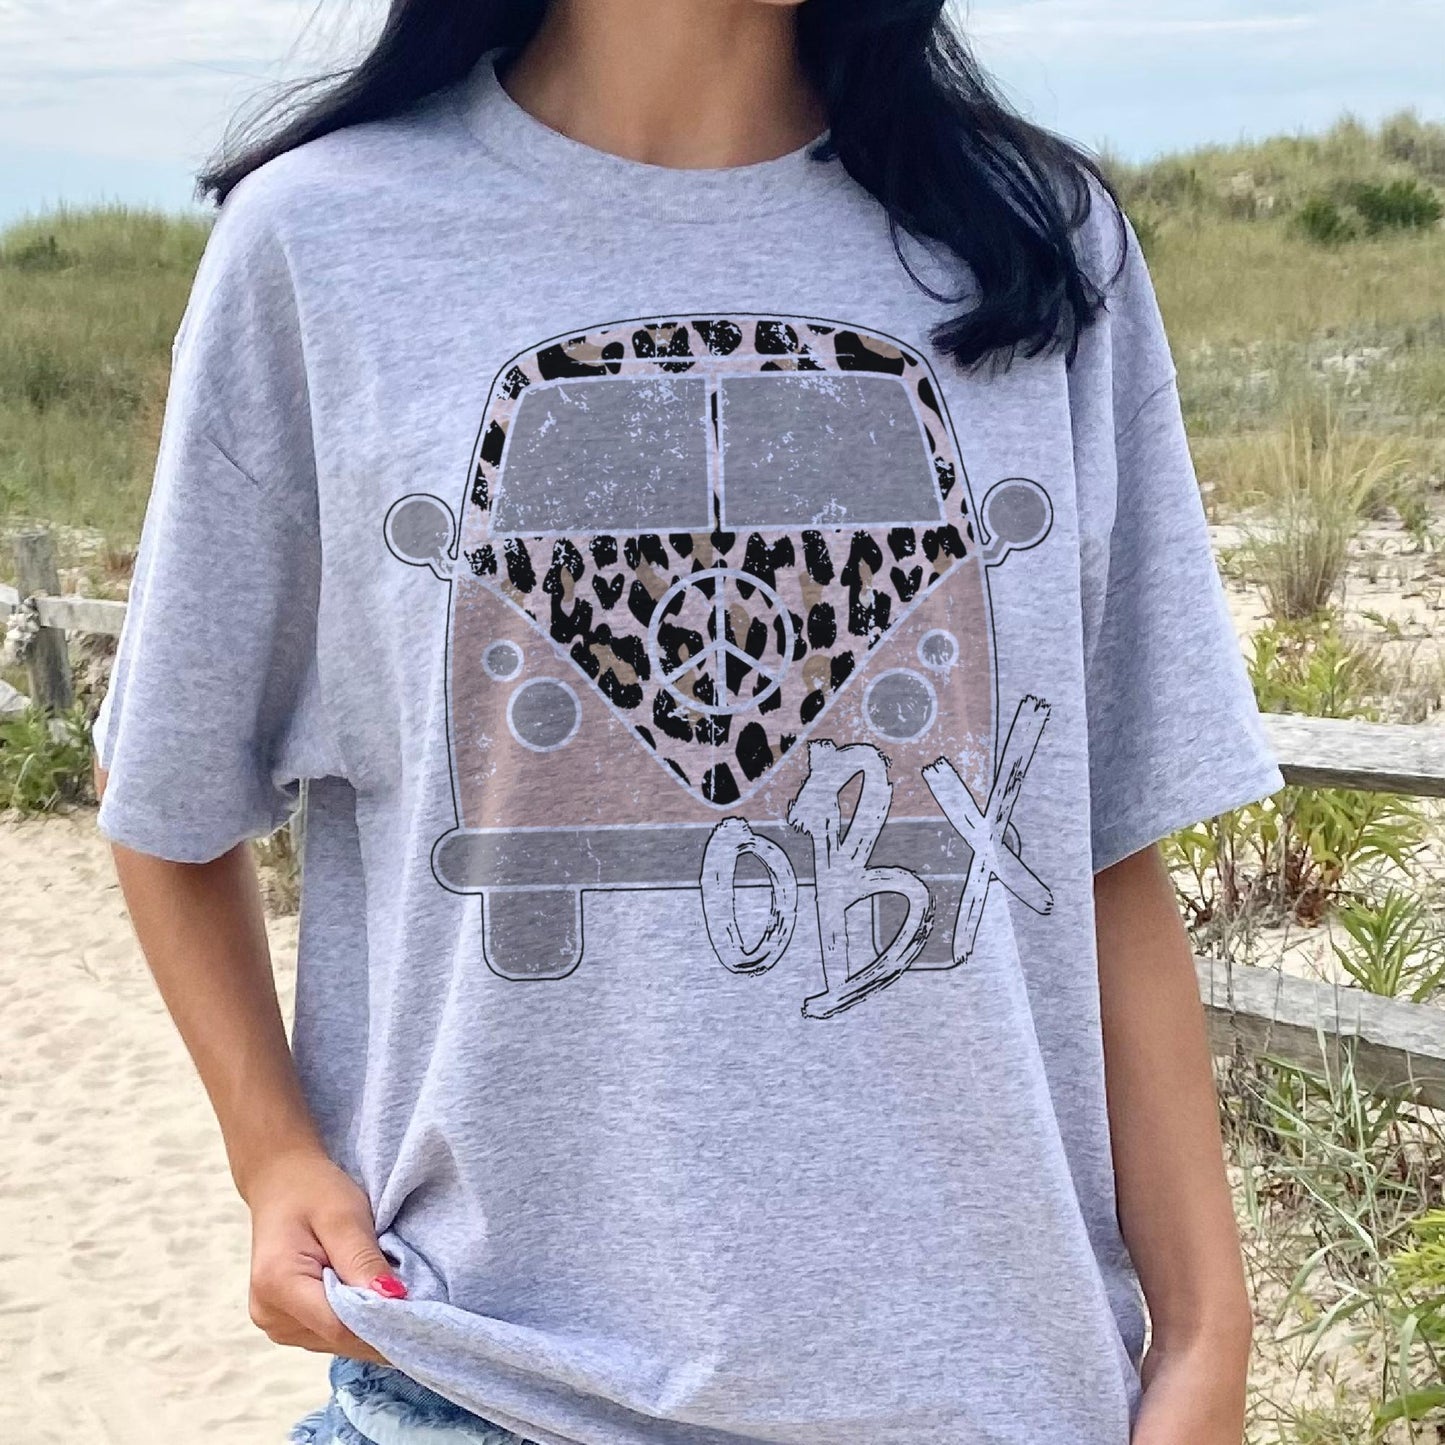 OBX T-Shirt Outer Banks T-shirts North Carolina Shirts OBX Tourist Tee Sublimation Graphic T-Shirt Outer Banks Vacation Shirt Womens Outerbanks T-Shirt